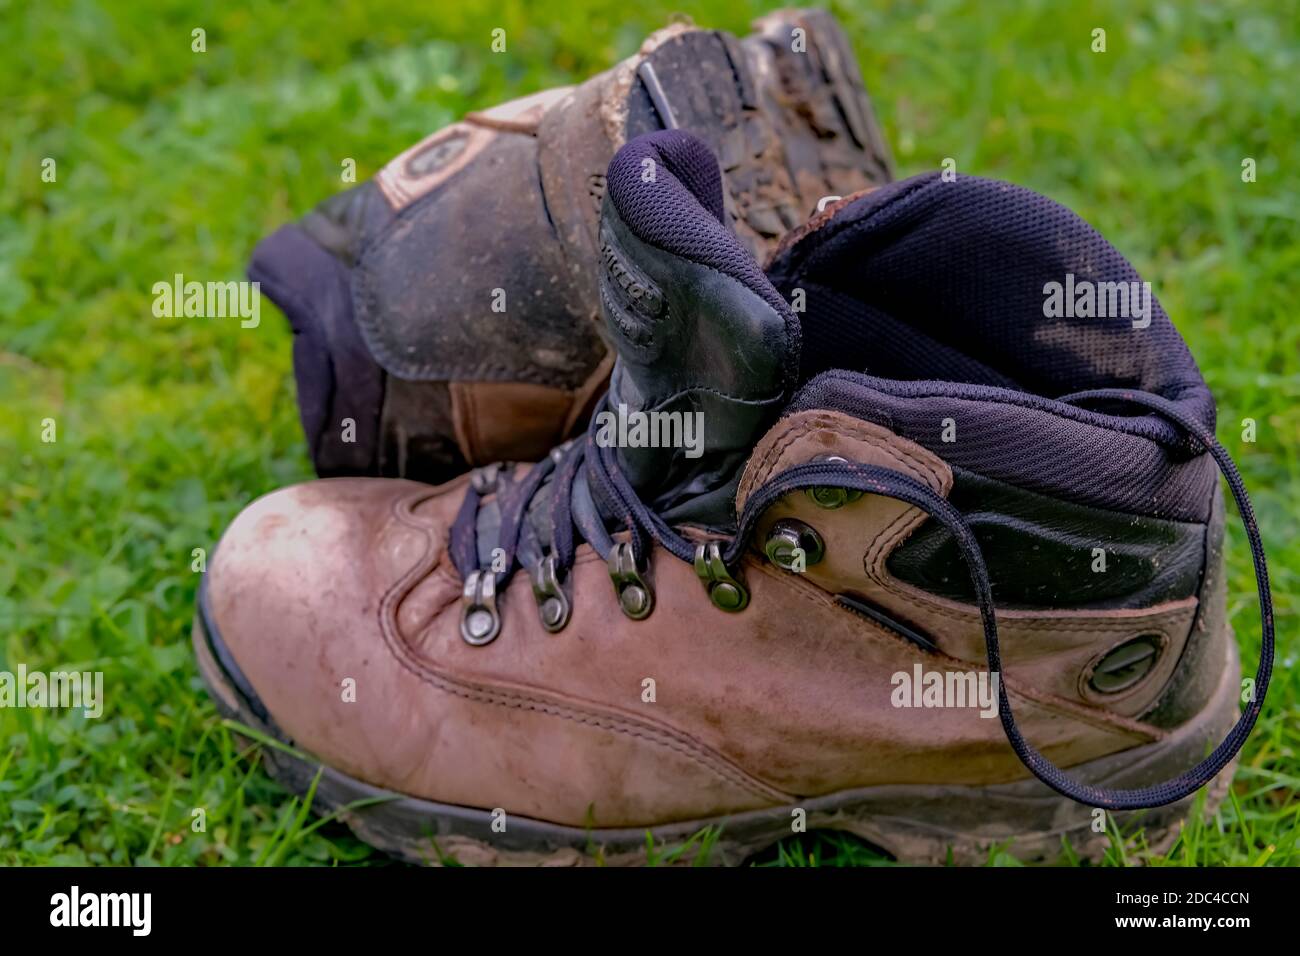 Norwich, Norfolk, UK – November 17 2020. An illustrative photo of a pair of well-worn and muddy Hi-Tec walking boots Stock Photo